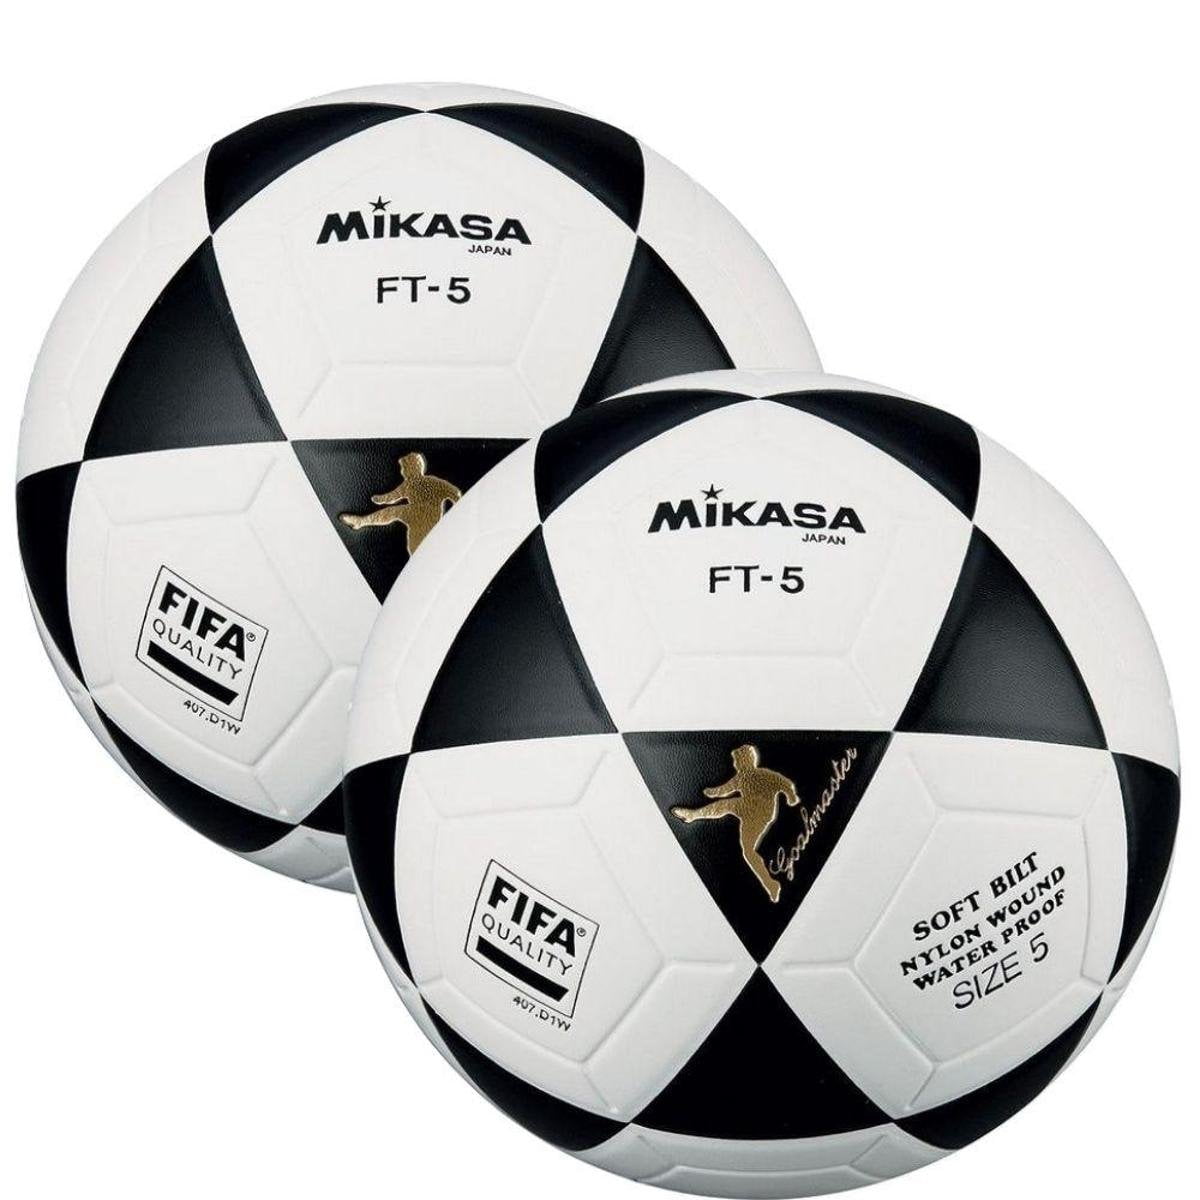 Mikasa FT5 Goal Master Soccer Ball Size 5 Official Footvolley Ball red white 